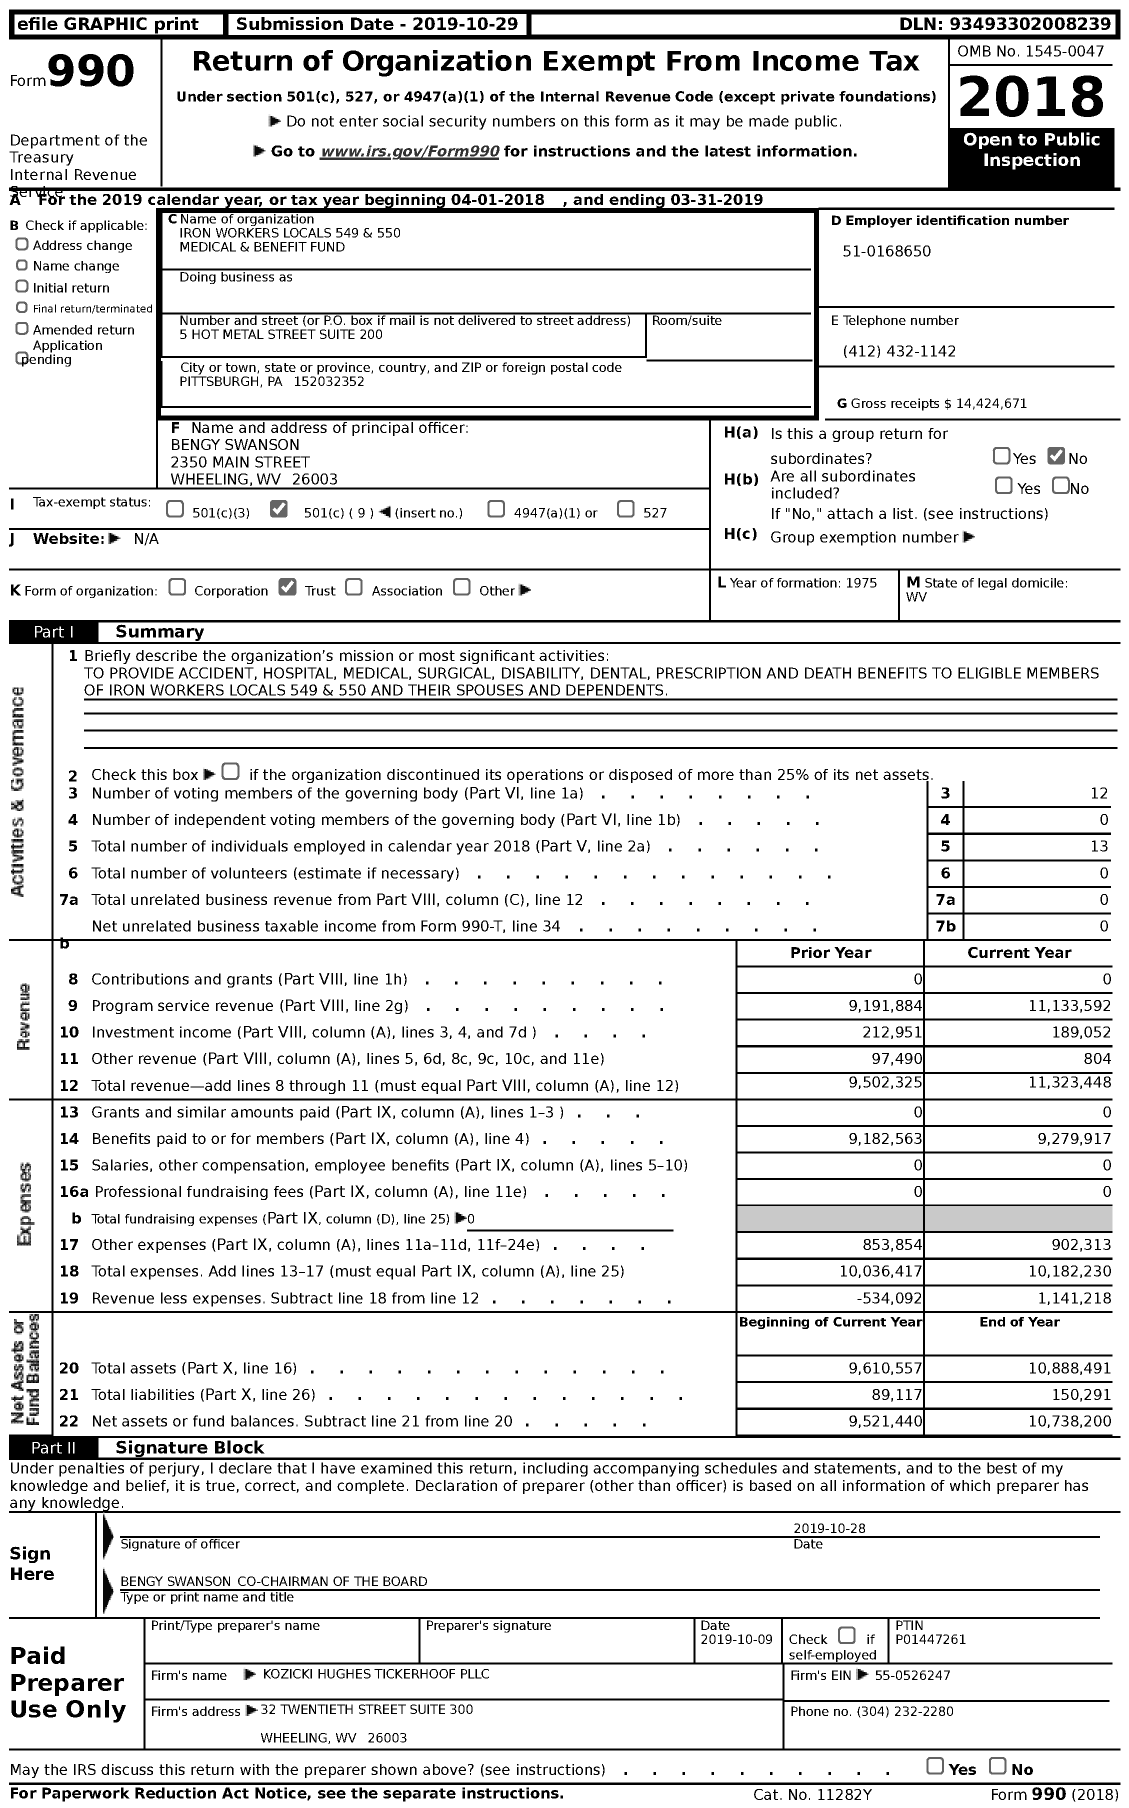 Image of first page of 2018 Form 990 for Iron Workers Locals 549 and 550 Medical and Benefit Fund